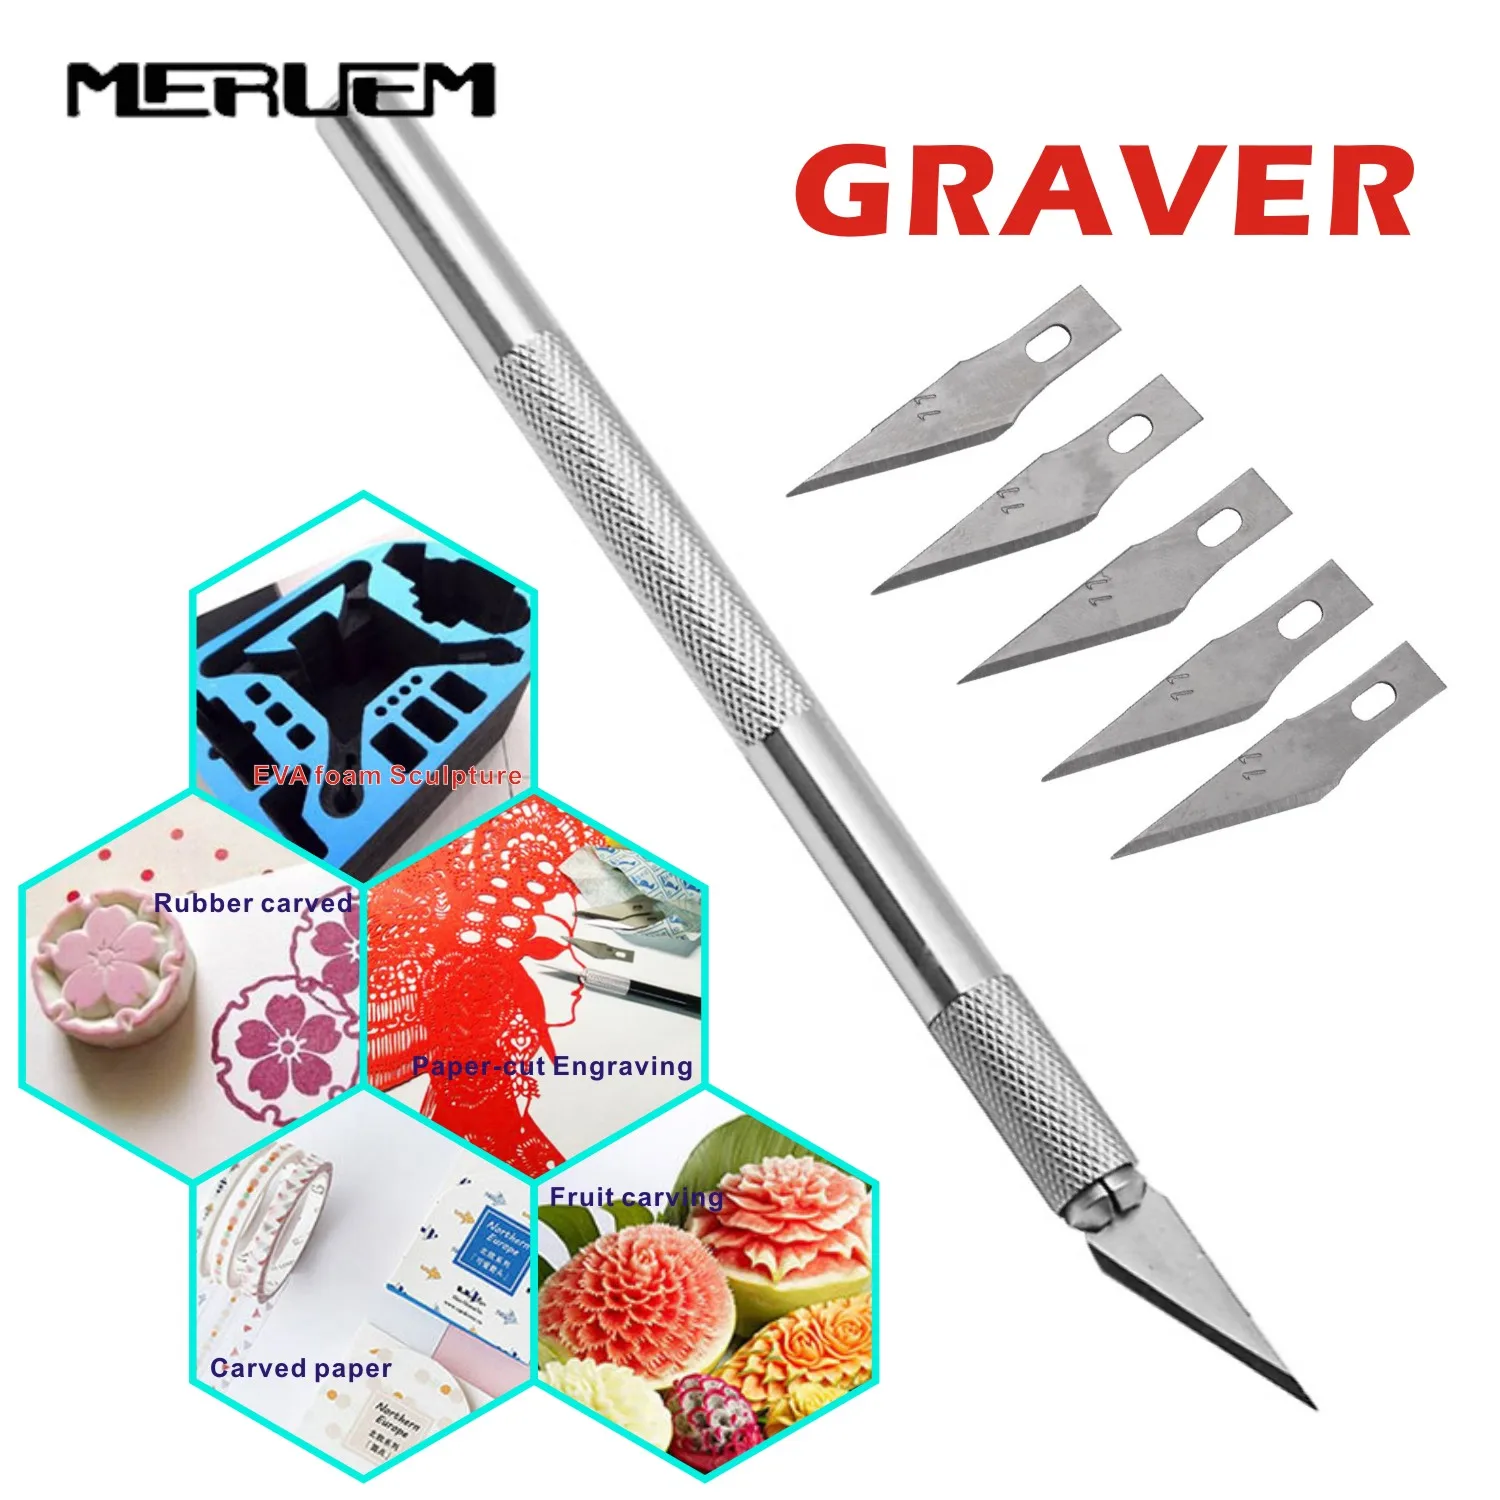 

Non-Slip Metal Scalpel Knife Tools Kit Cutter Engraving Craft knives Mobile Phone PCB DIY Repair Hand Tools Clay Sculpture